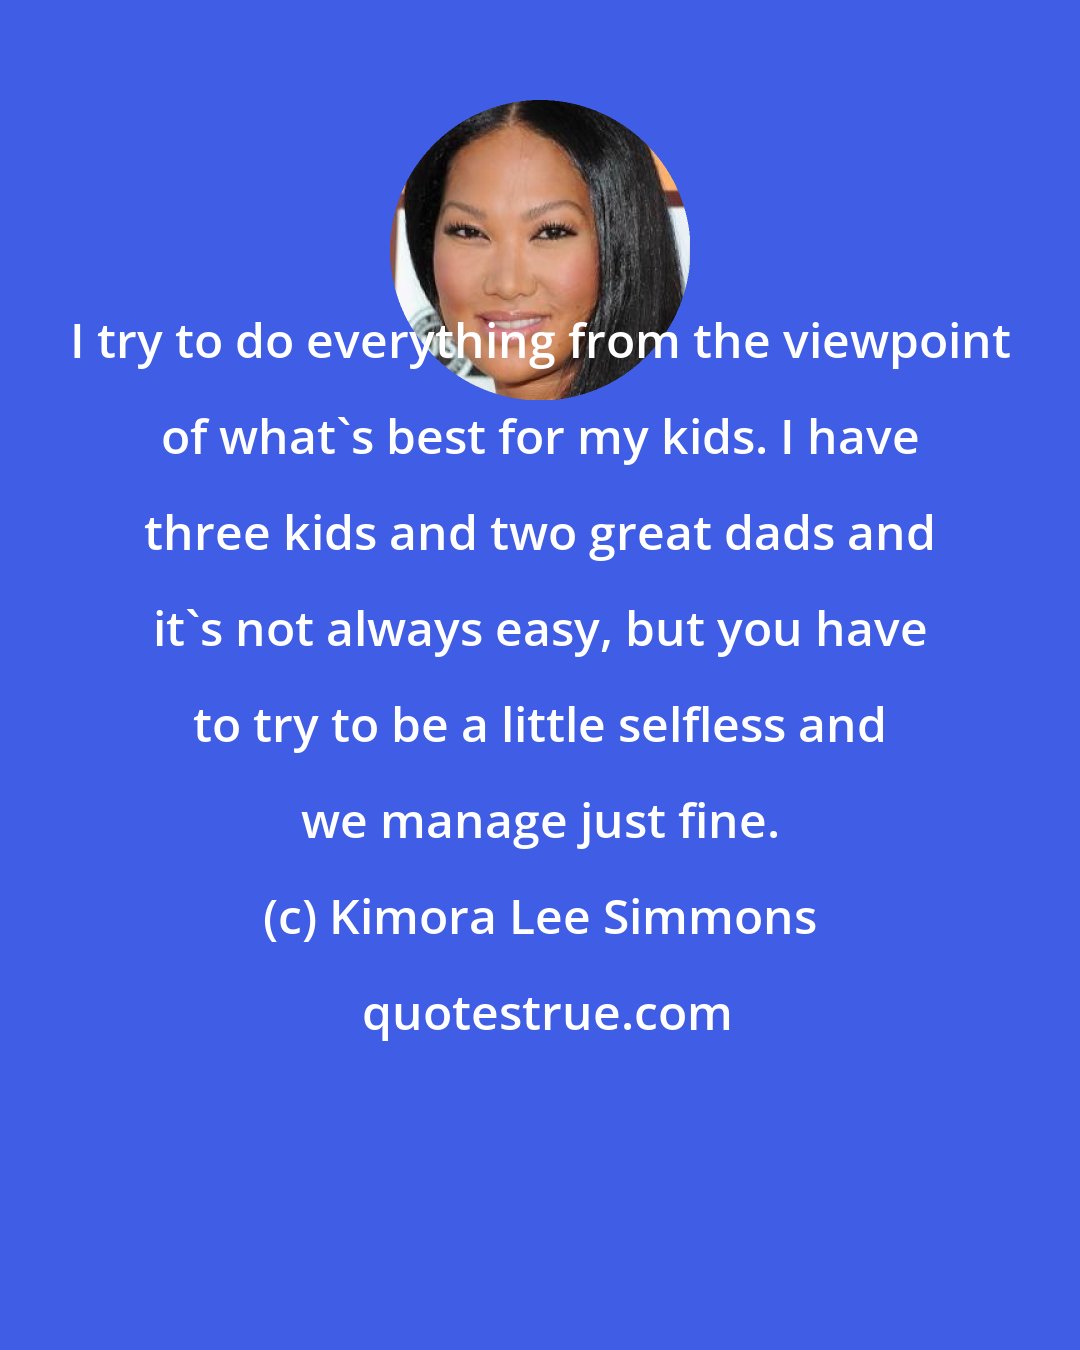 Kimora Lee Simmons: I try to do everything from the viewpoint of what's best for my kids. I have three kids and two great dads and it's not always easy, but you have to try to be a little selfless and we manage just fine.